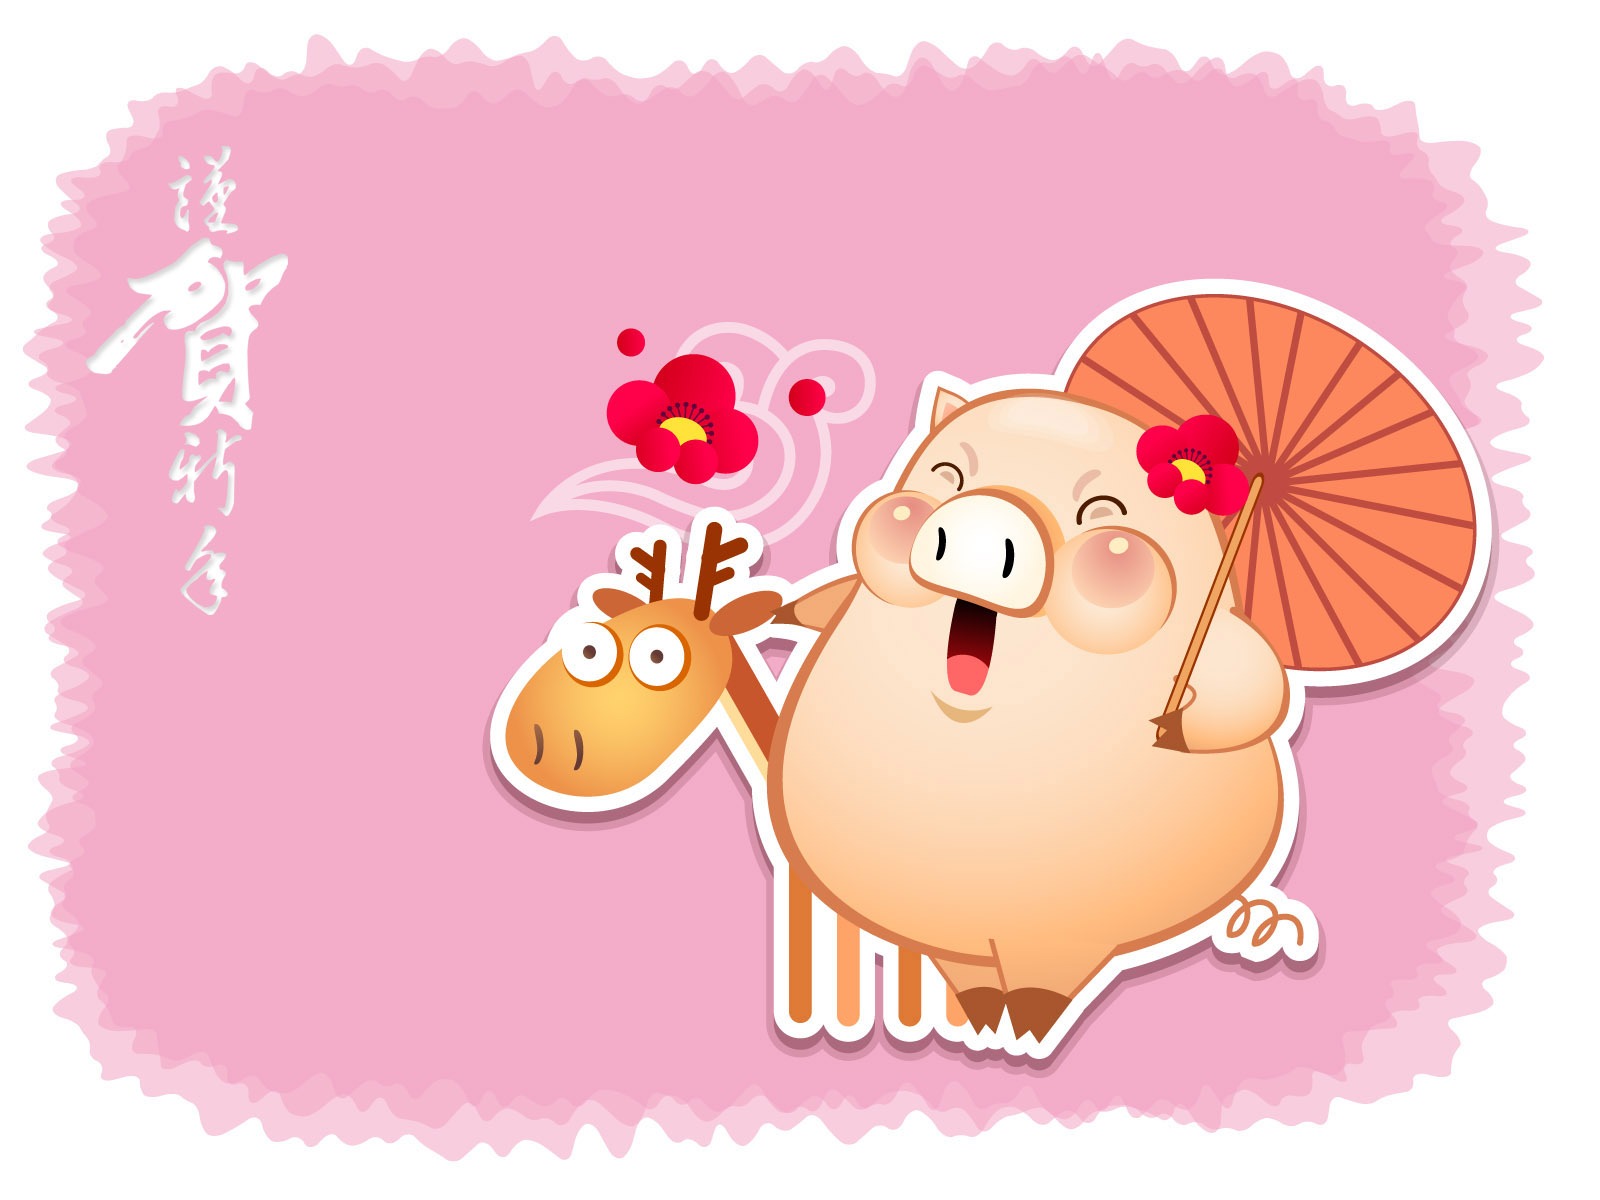 Year of the Pig Theme Wallpaper #5 - 1600x1200